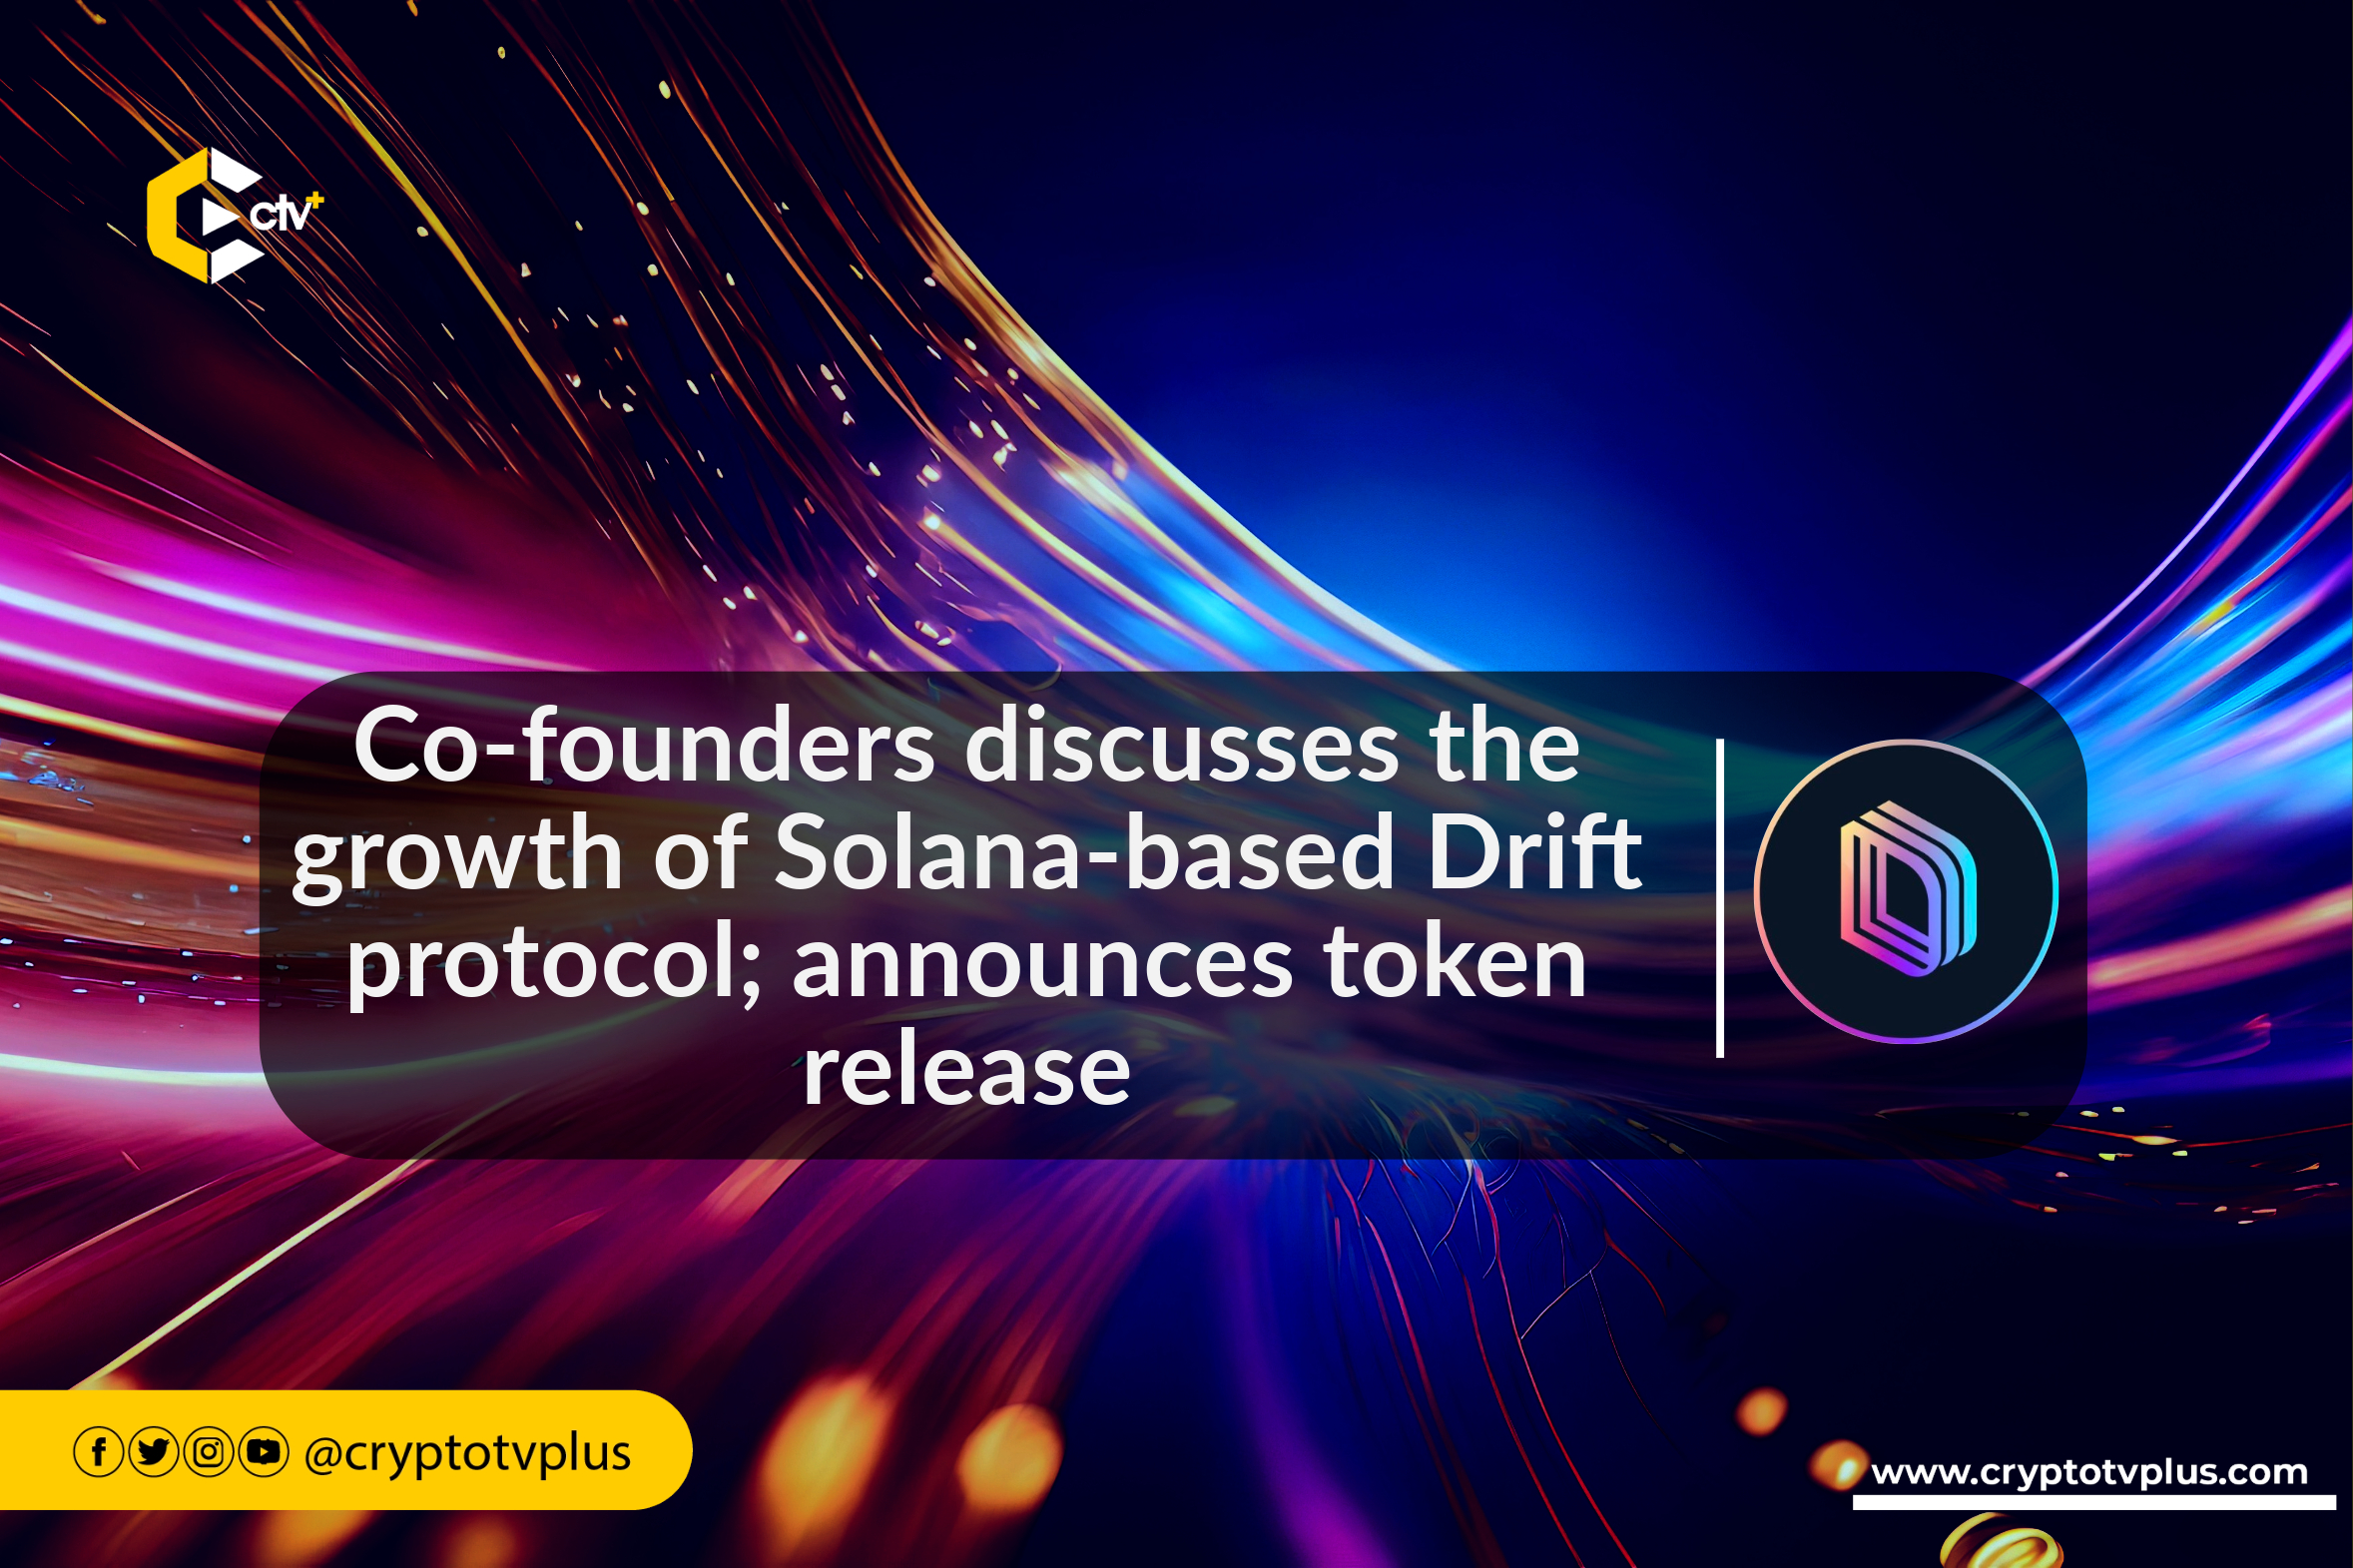 Co-founders discusses the growth of Solana-based Drift protocol; announces token release